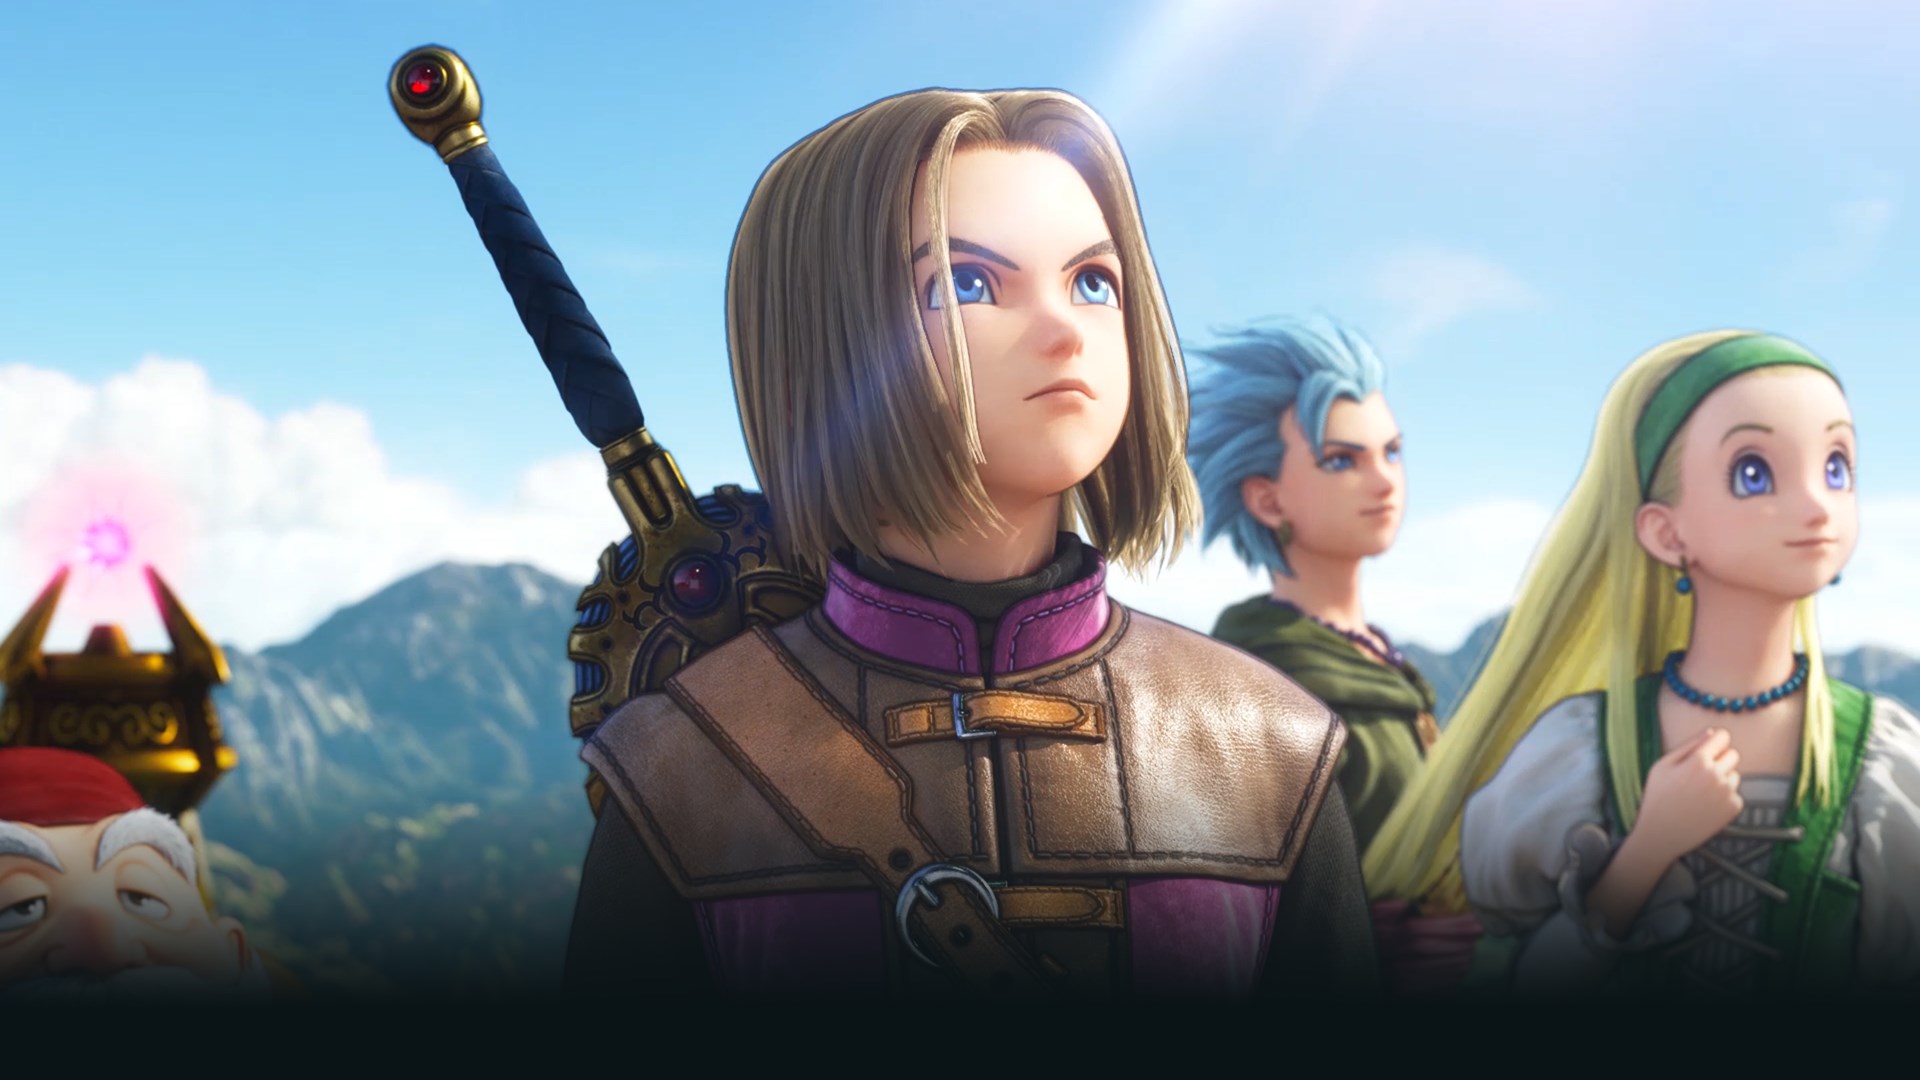 Dragon Quest XI S: Echoes of an Elusive Age - Definitive Edition screenshot 29469